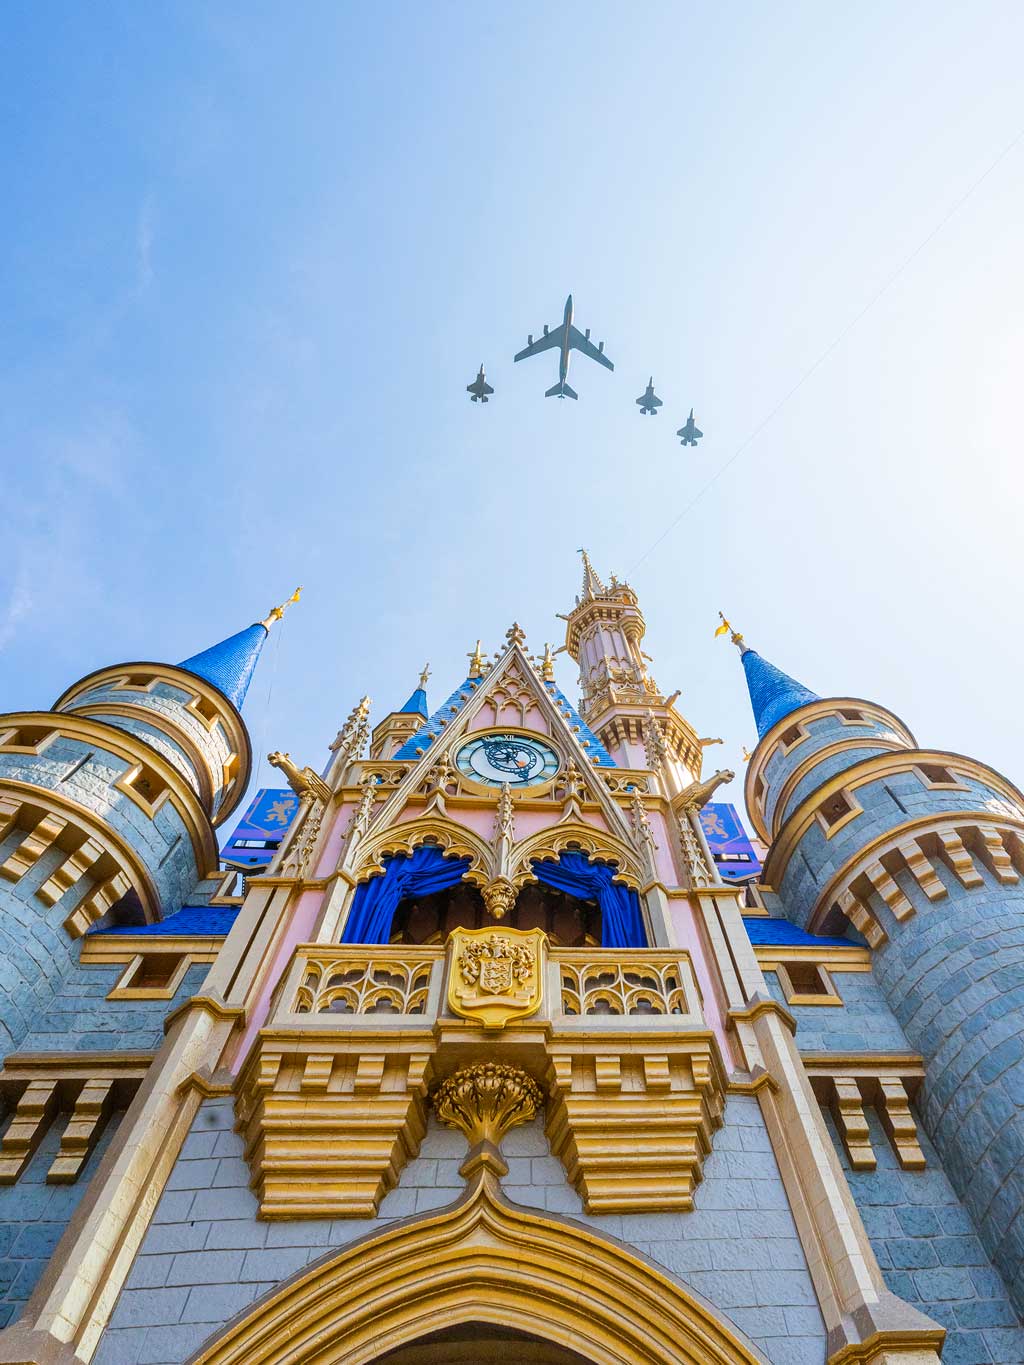  The U.S. Air Force conducts a special Independence Day flyover of Magic Kingdom Park on July 4, 2023. A squadron of F-35 stealth fighter jets flown by the 33rd Fighter Wing made two passes over the world-famous theme park. The first included a KC-135 tanker flown by the 6th Air Refueling Wing to mark the 100th anniversary of the Air Force’s 100 years of aerial refueling capabilities. (Abigail Nilsson, Photographer) 